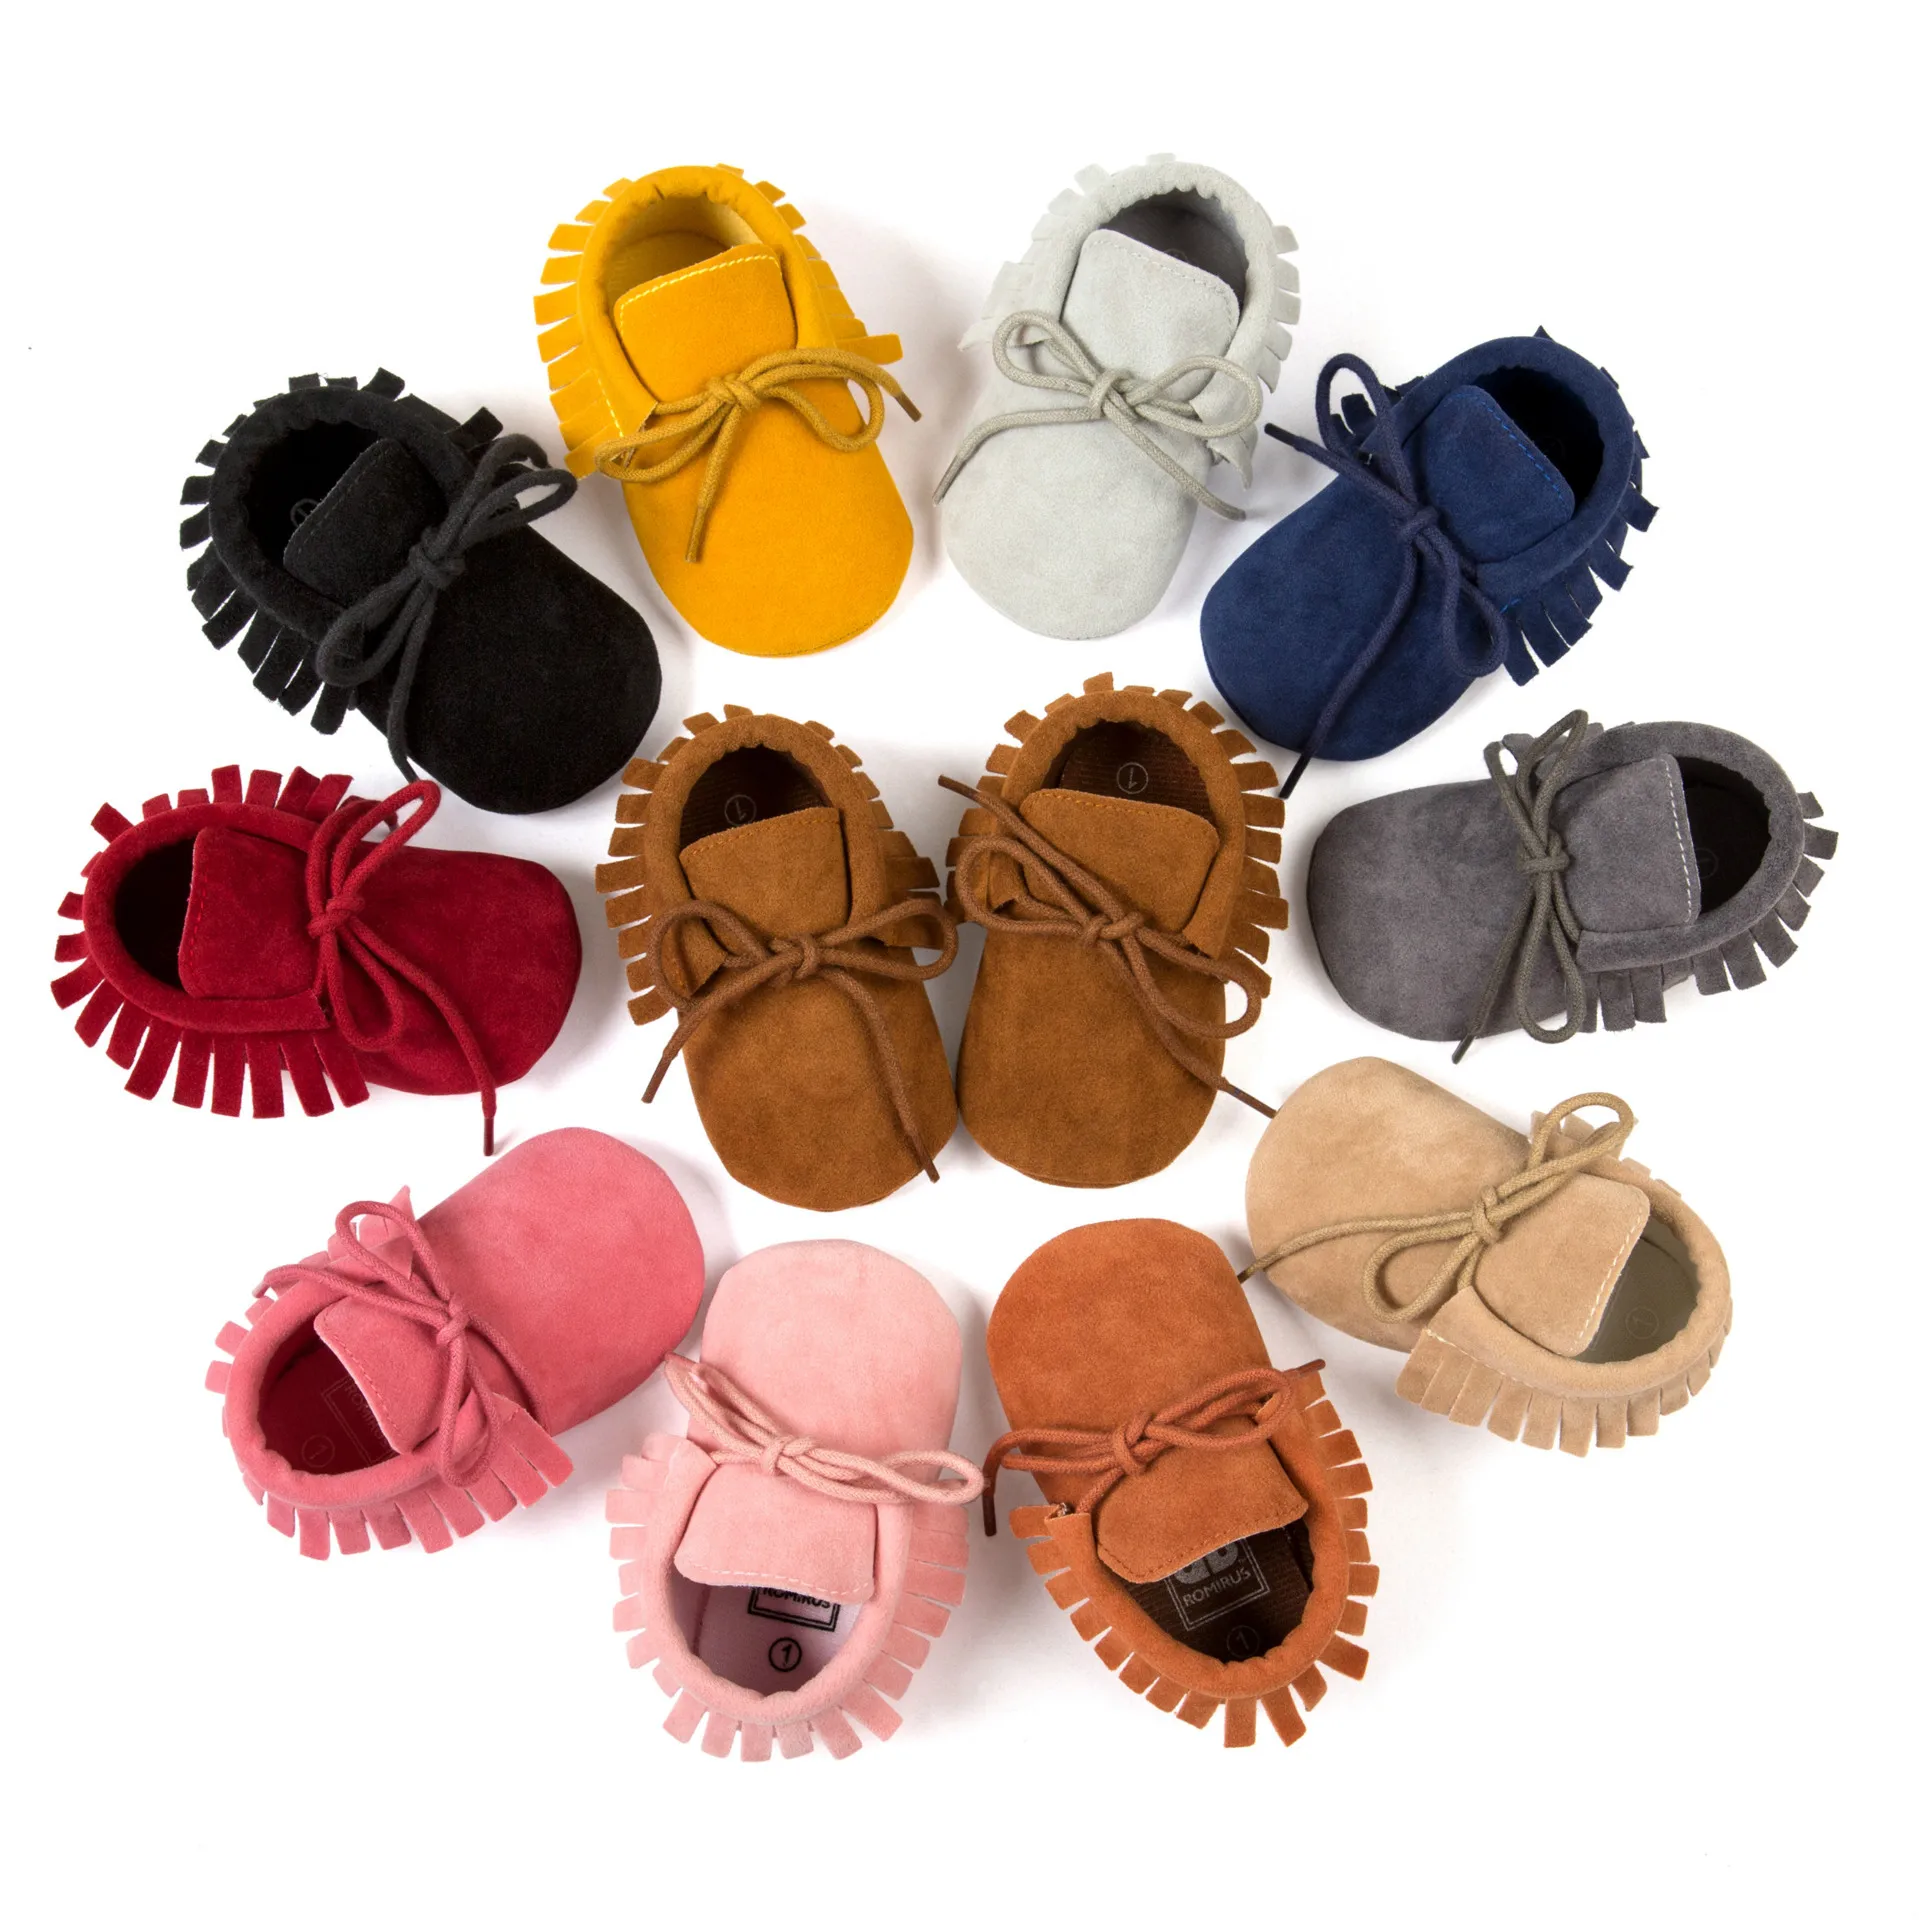 

Soft Sole baby shoes Moccasin girls Baby First Walker Shoes Toddler PU Leather Non-Slip Newborn Infant Shoes For 0-12M